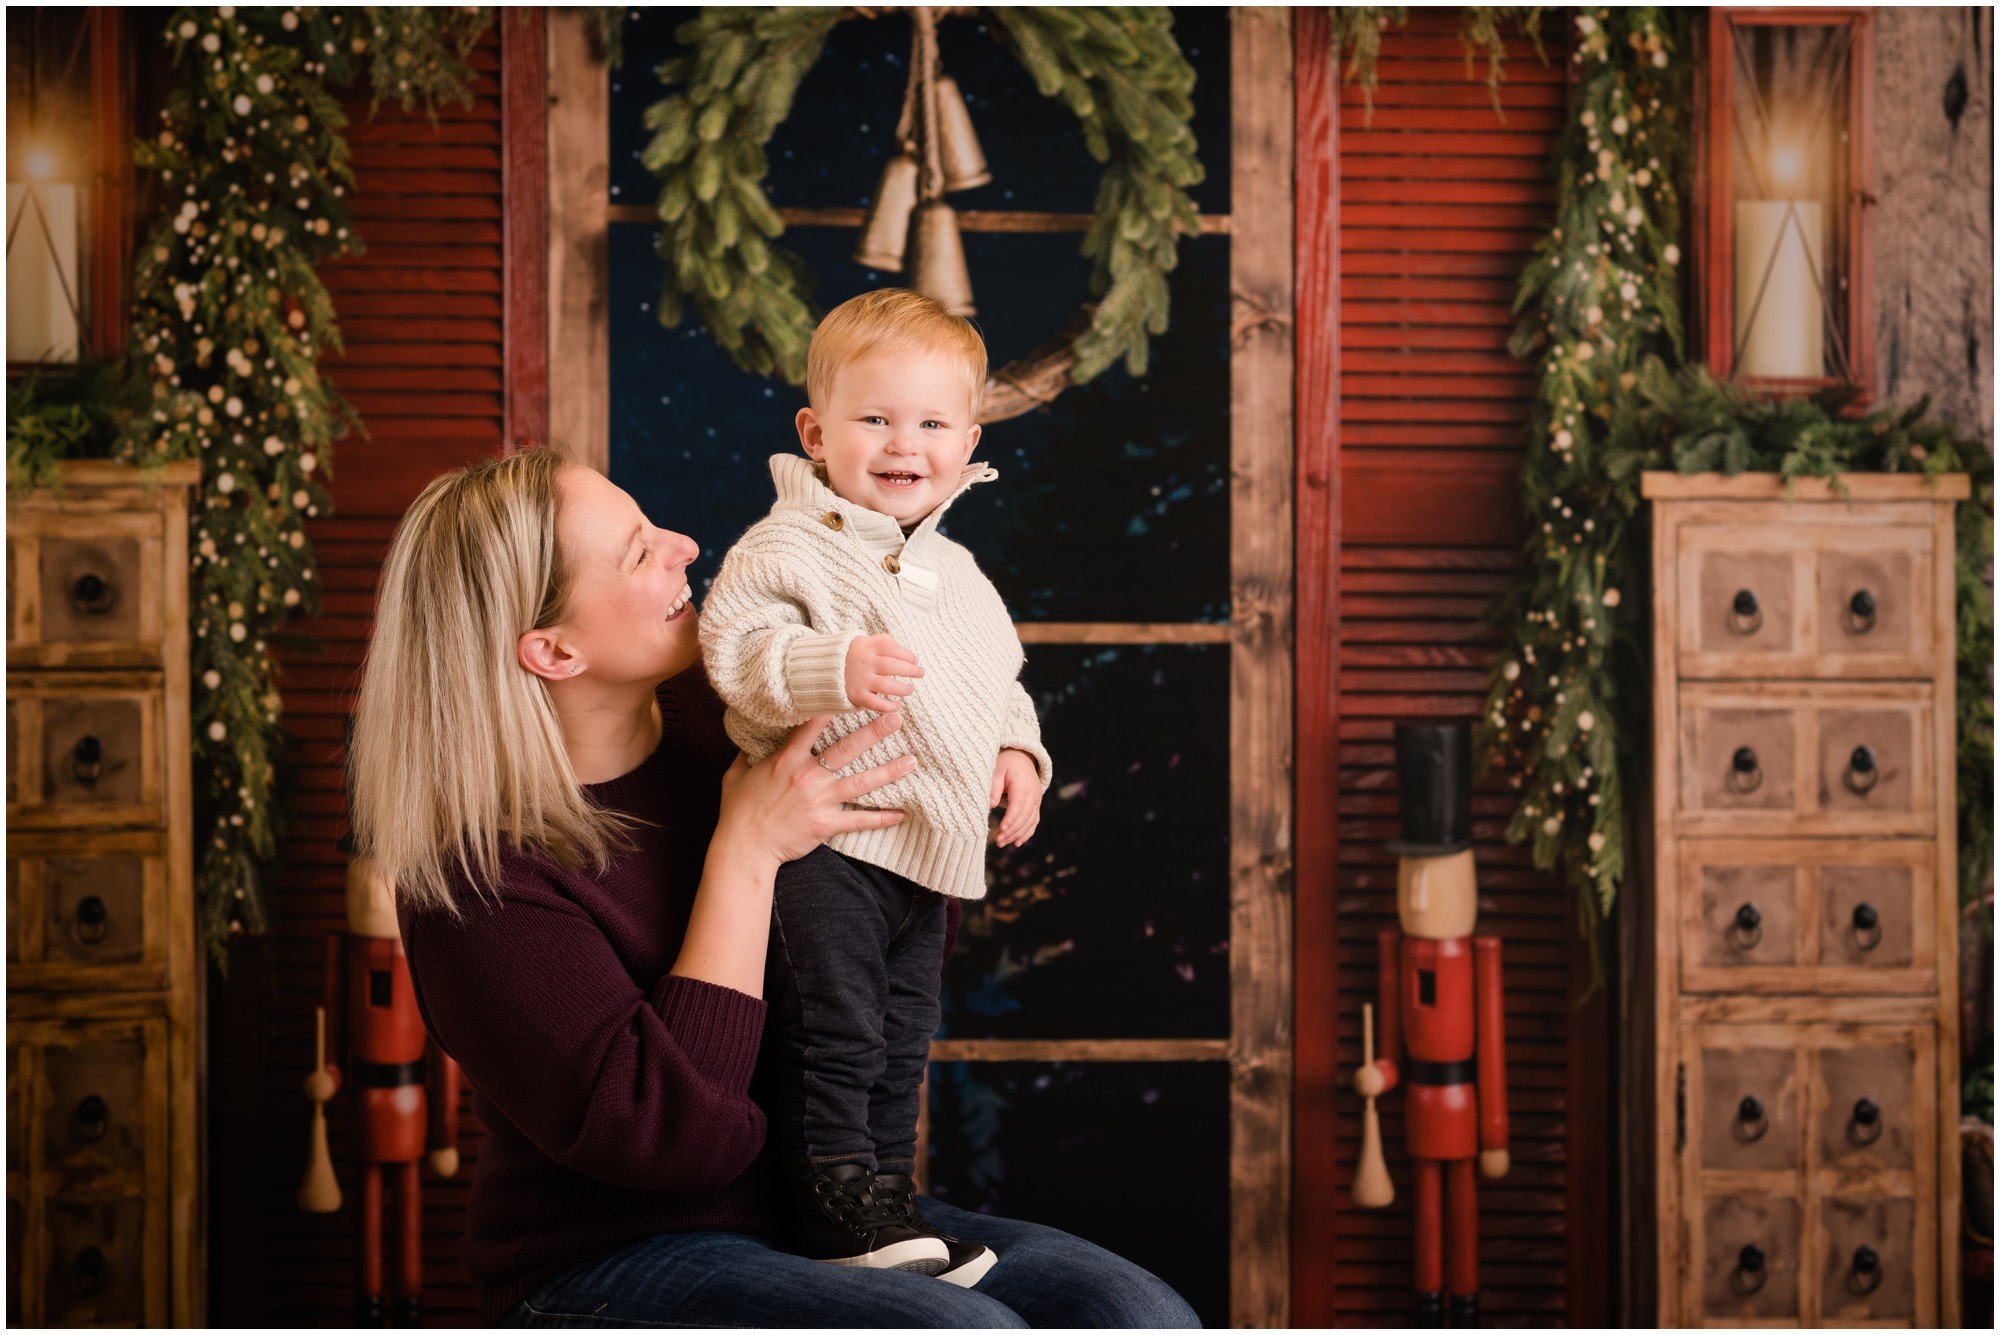 Heirloom Holiday Photos in Chicagoland